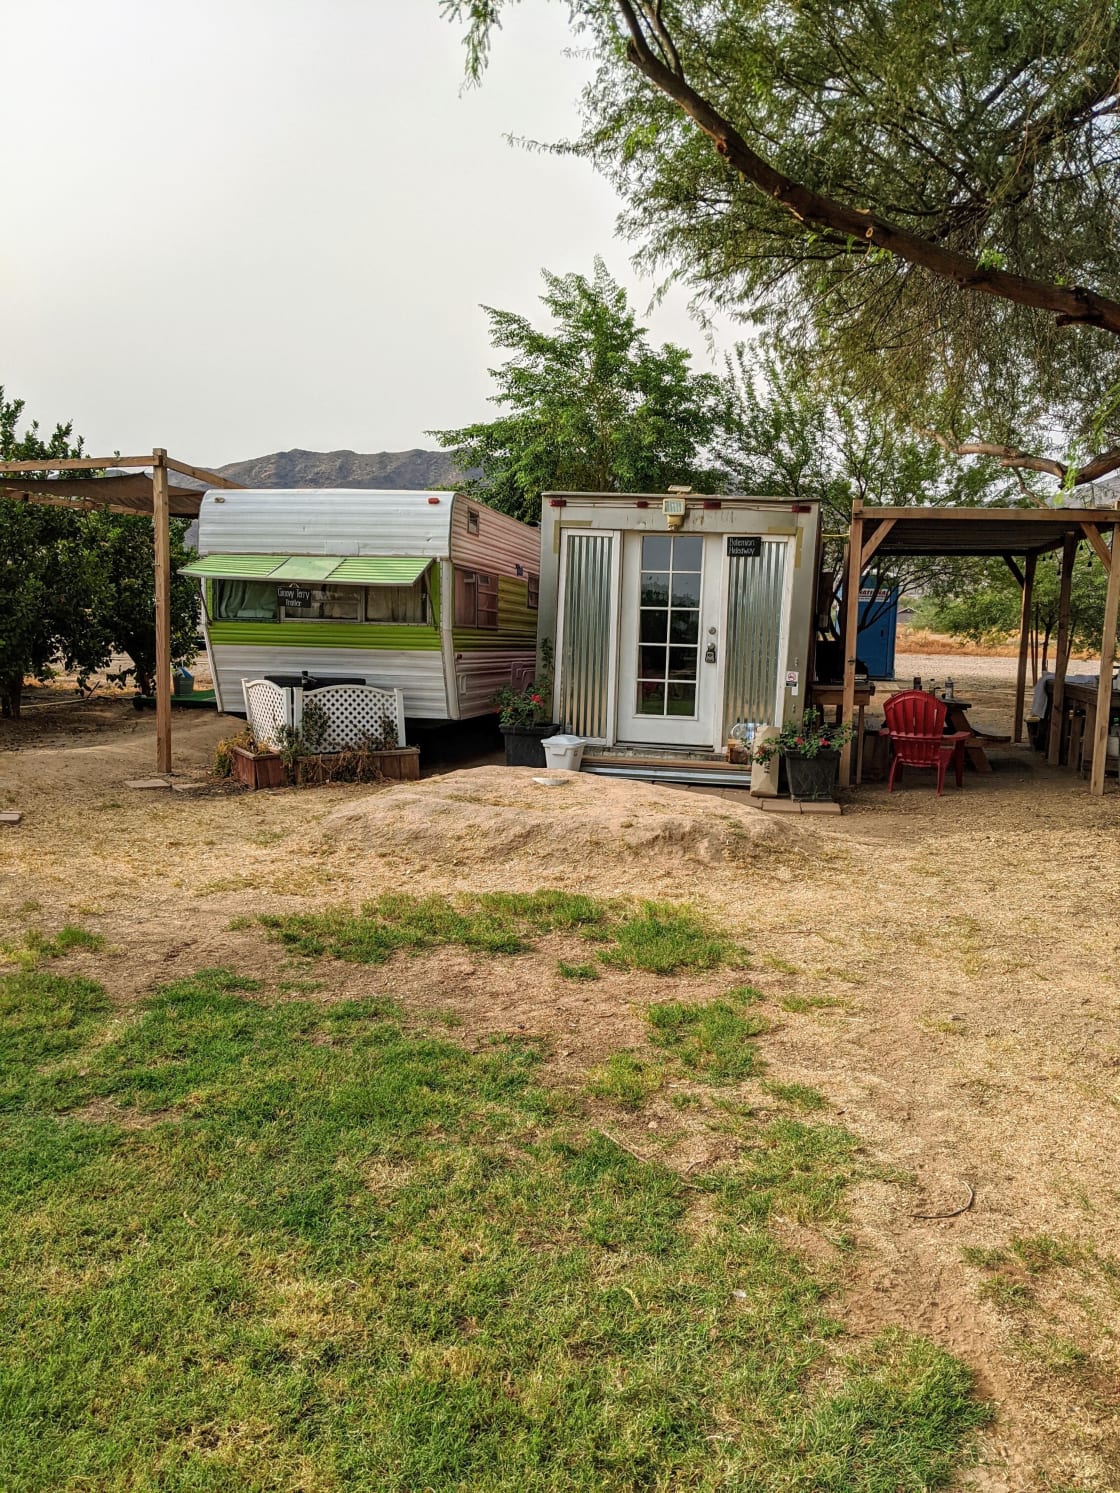 Front view of the Bohemian Hideaway and Terry's Trailer. This would be super cool for close friends to rent each unit and have a little cookout, then retire to their separate sleeping spaces!